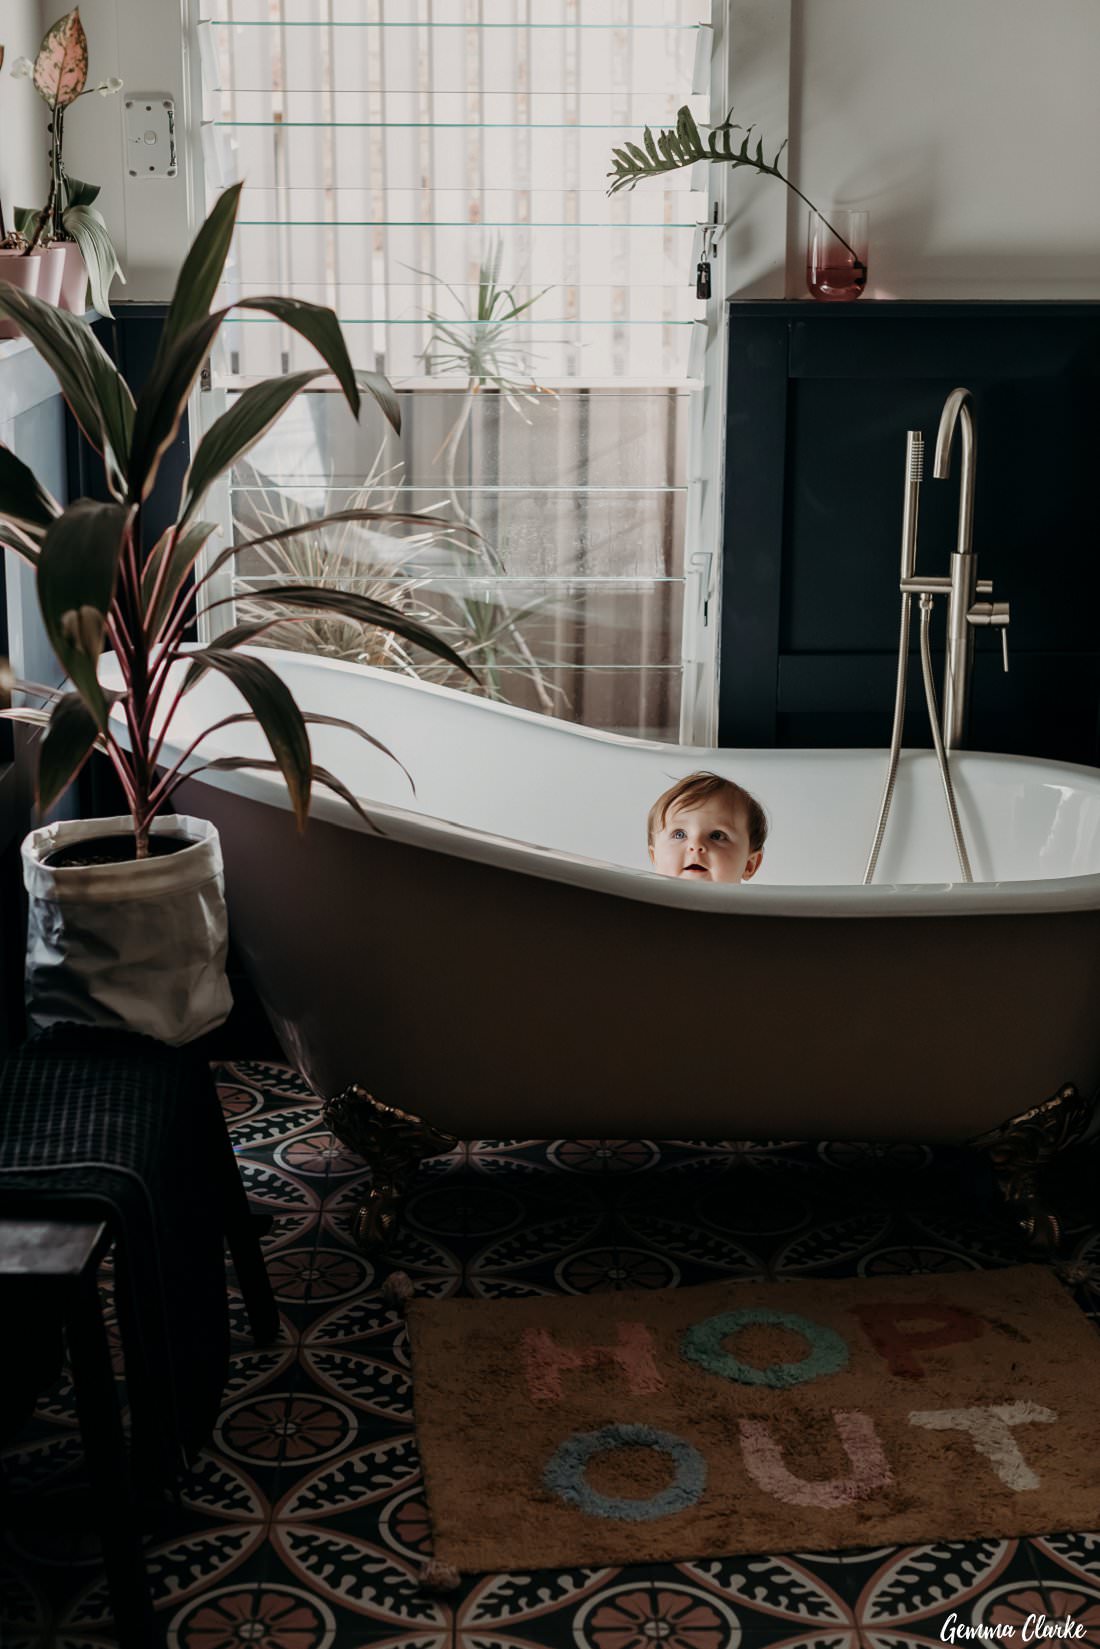 9 month old baby enjoying her antique bath photoshoot with Hop Out novelty bath mat!